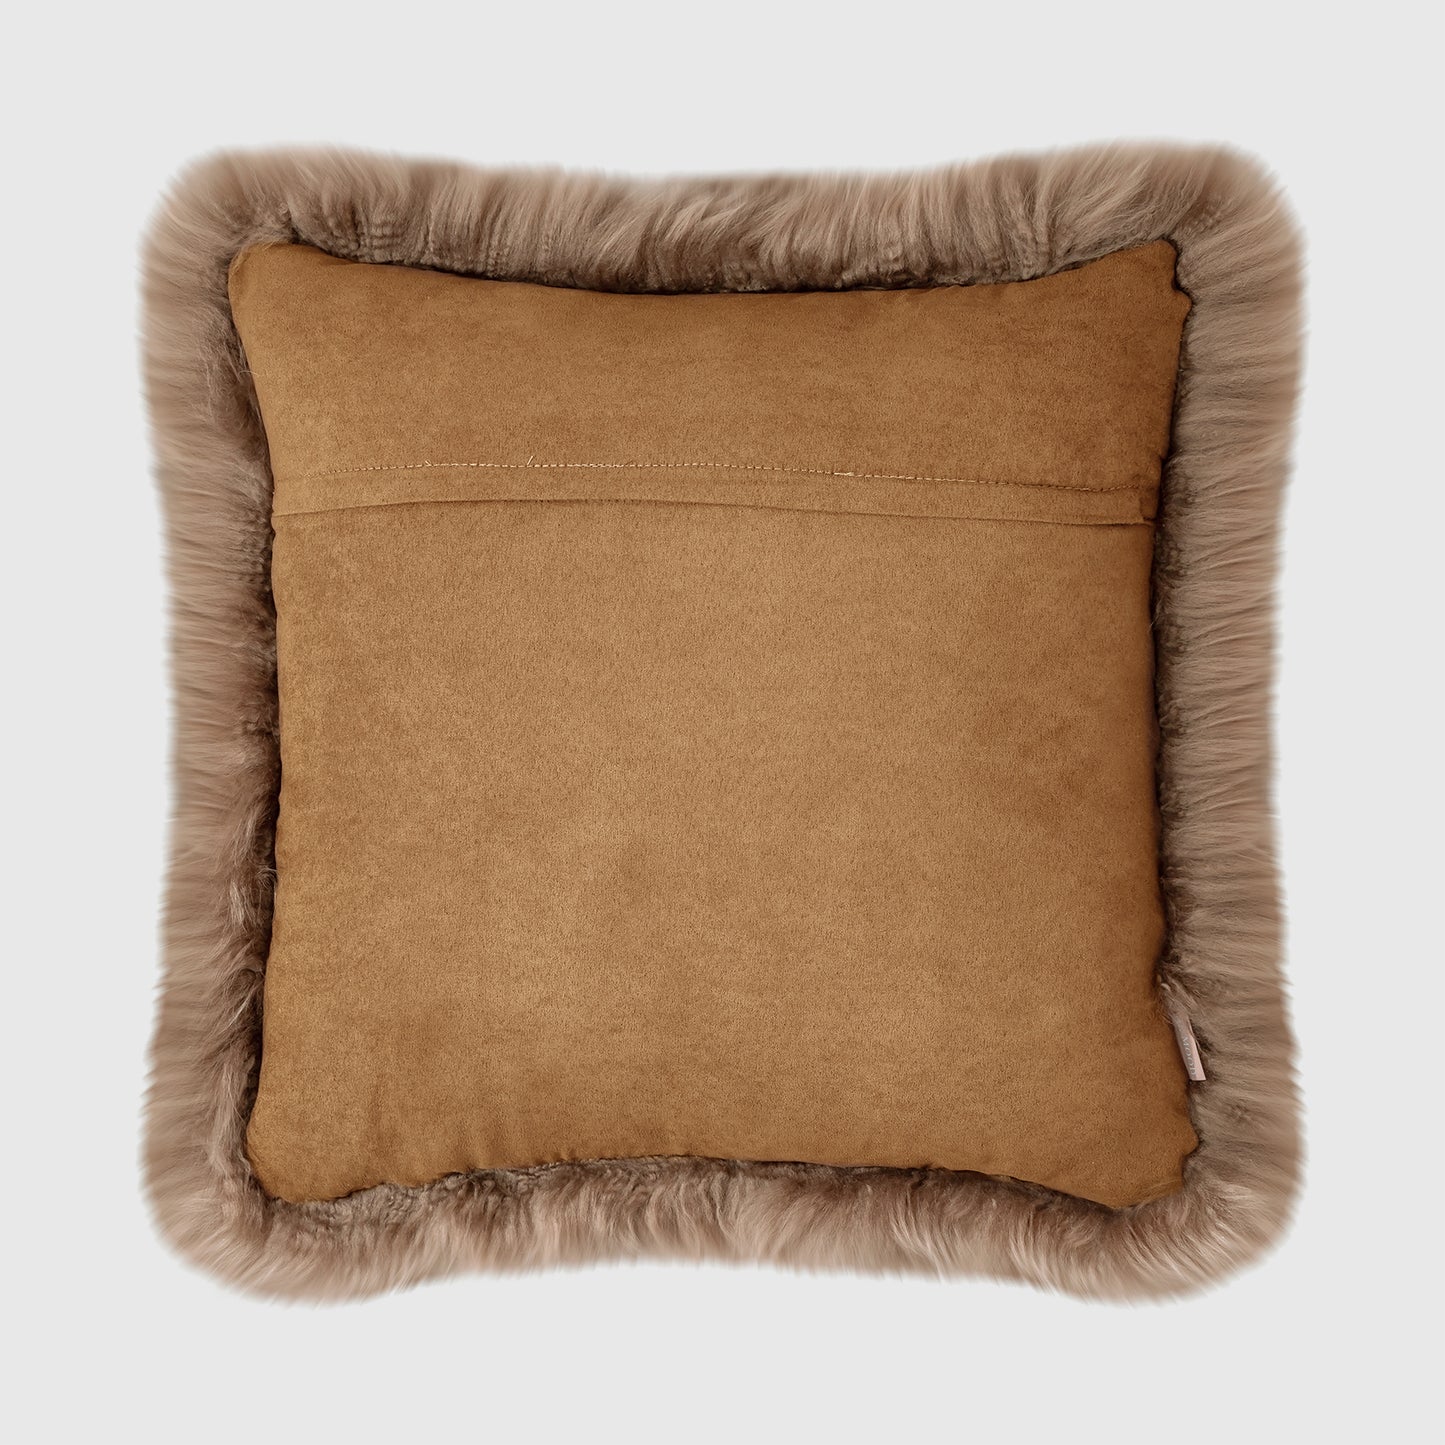 The Mood | Charlie Sheepskin 22”x22” Pillow, Toffee